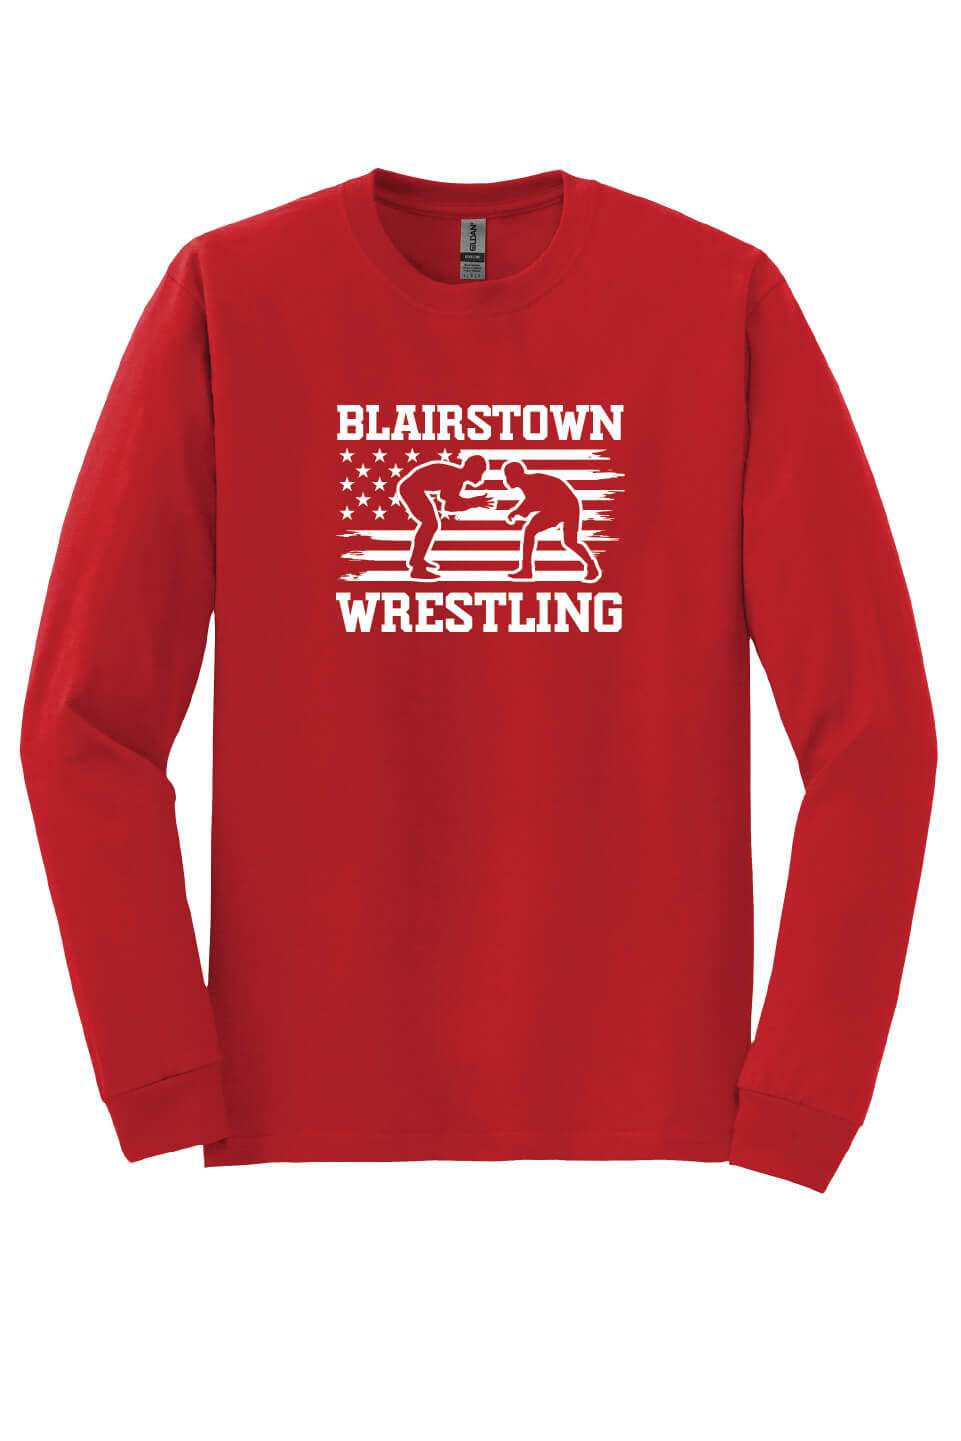 Blairstown Wrestling Flag Long Sleeve T-Shirt red